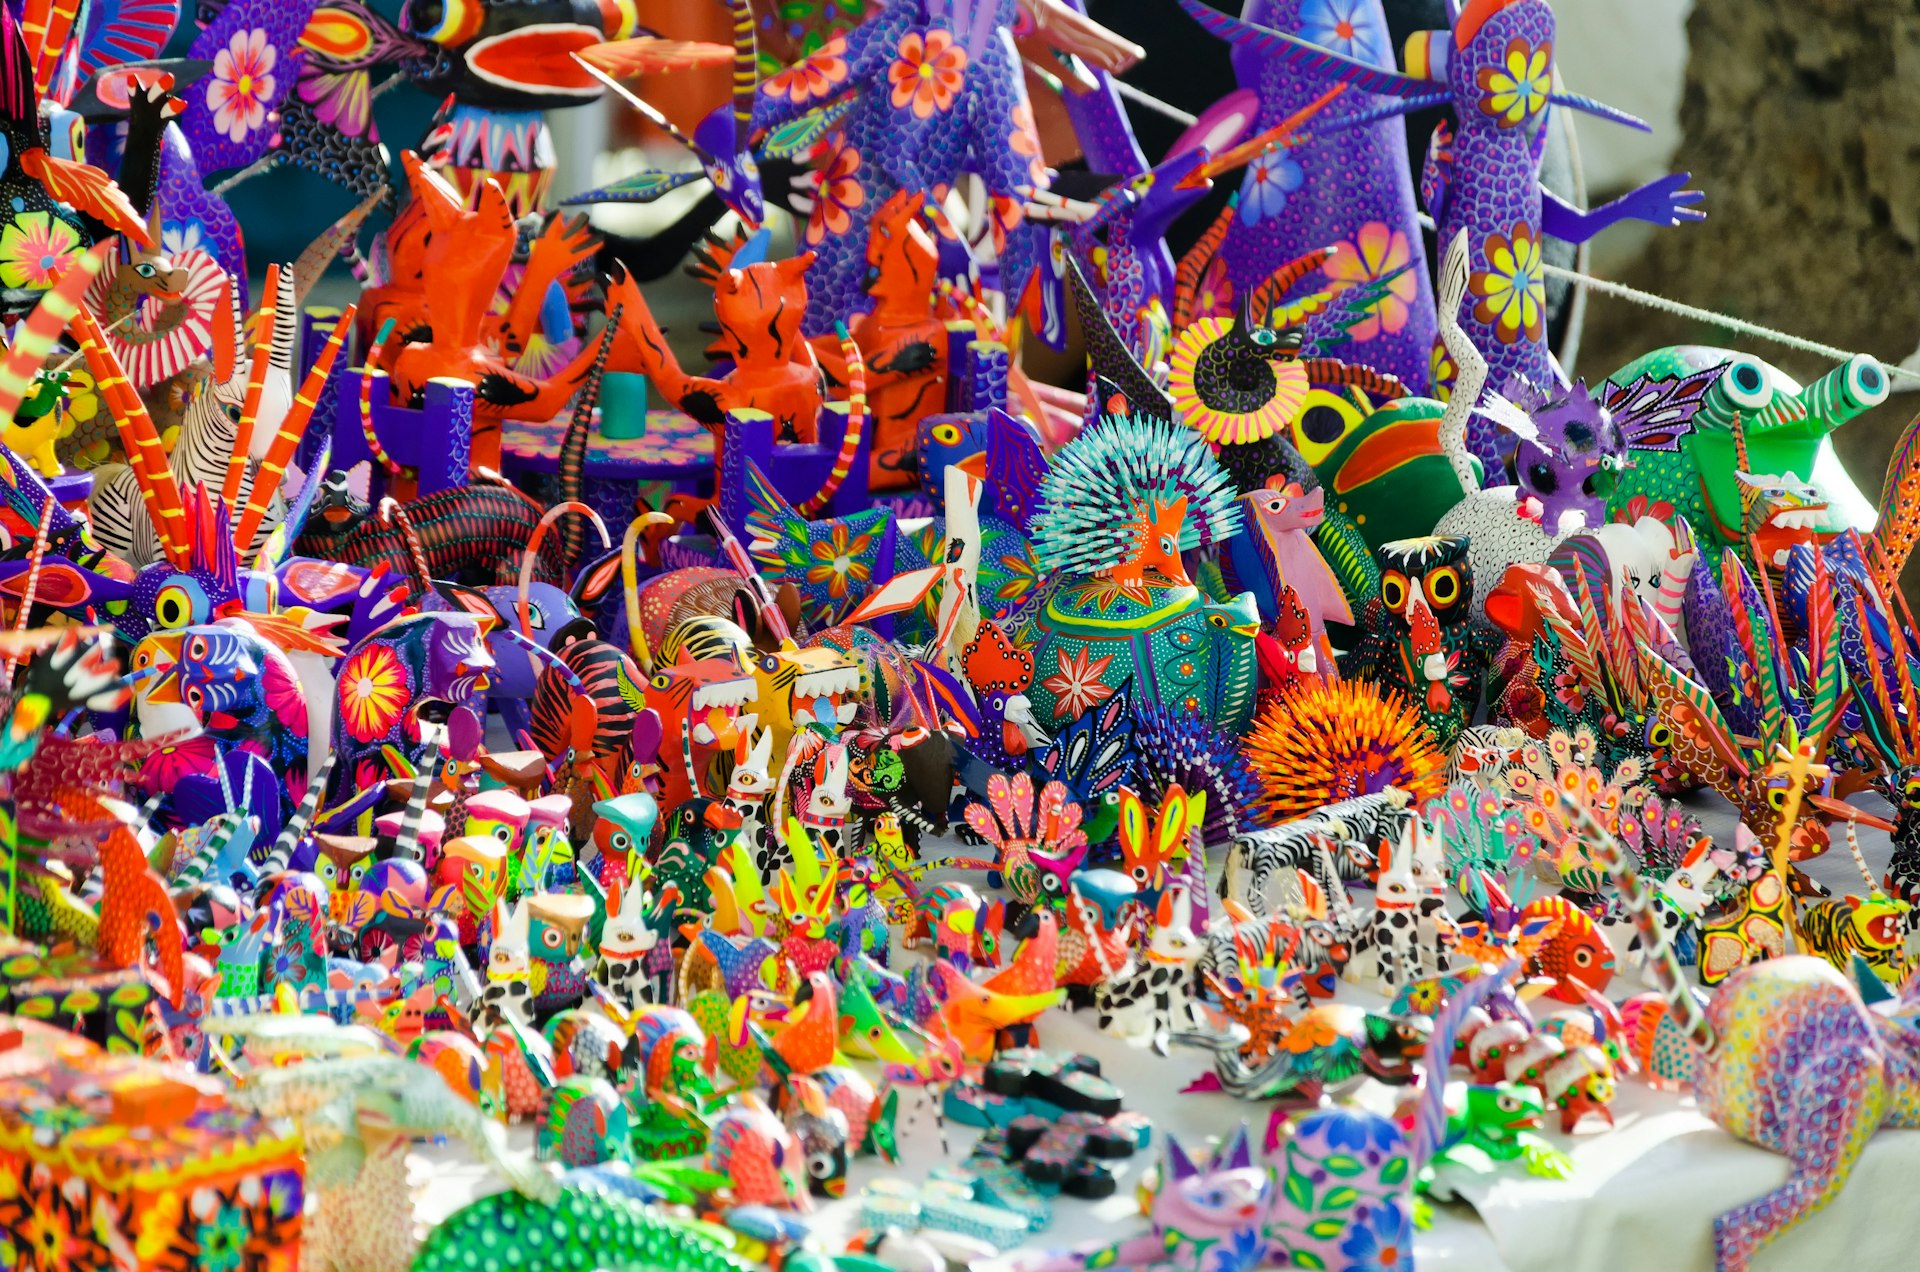 Traditional handicrafts known as alebrijes (Mexican folk art sculptures) from Oaxaca